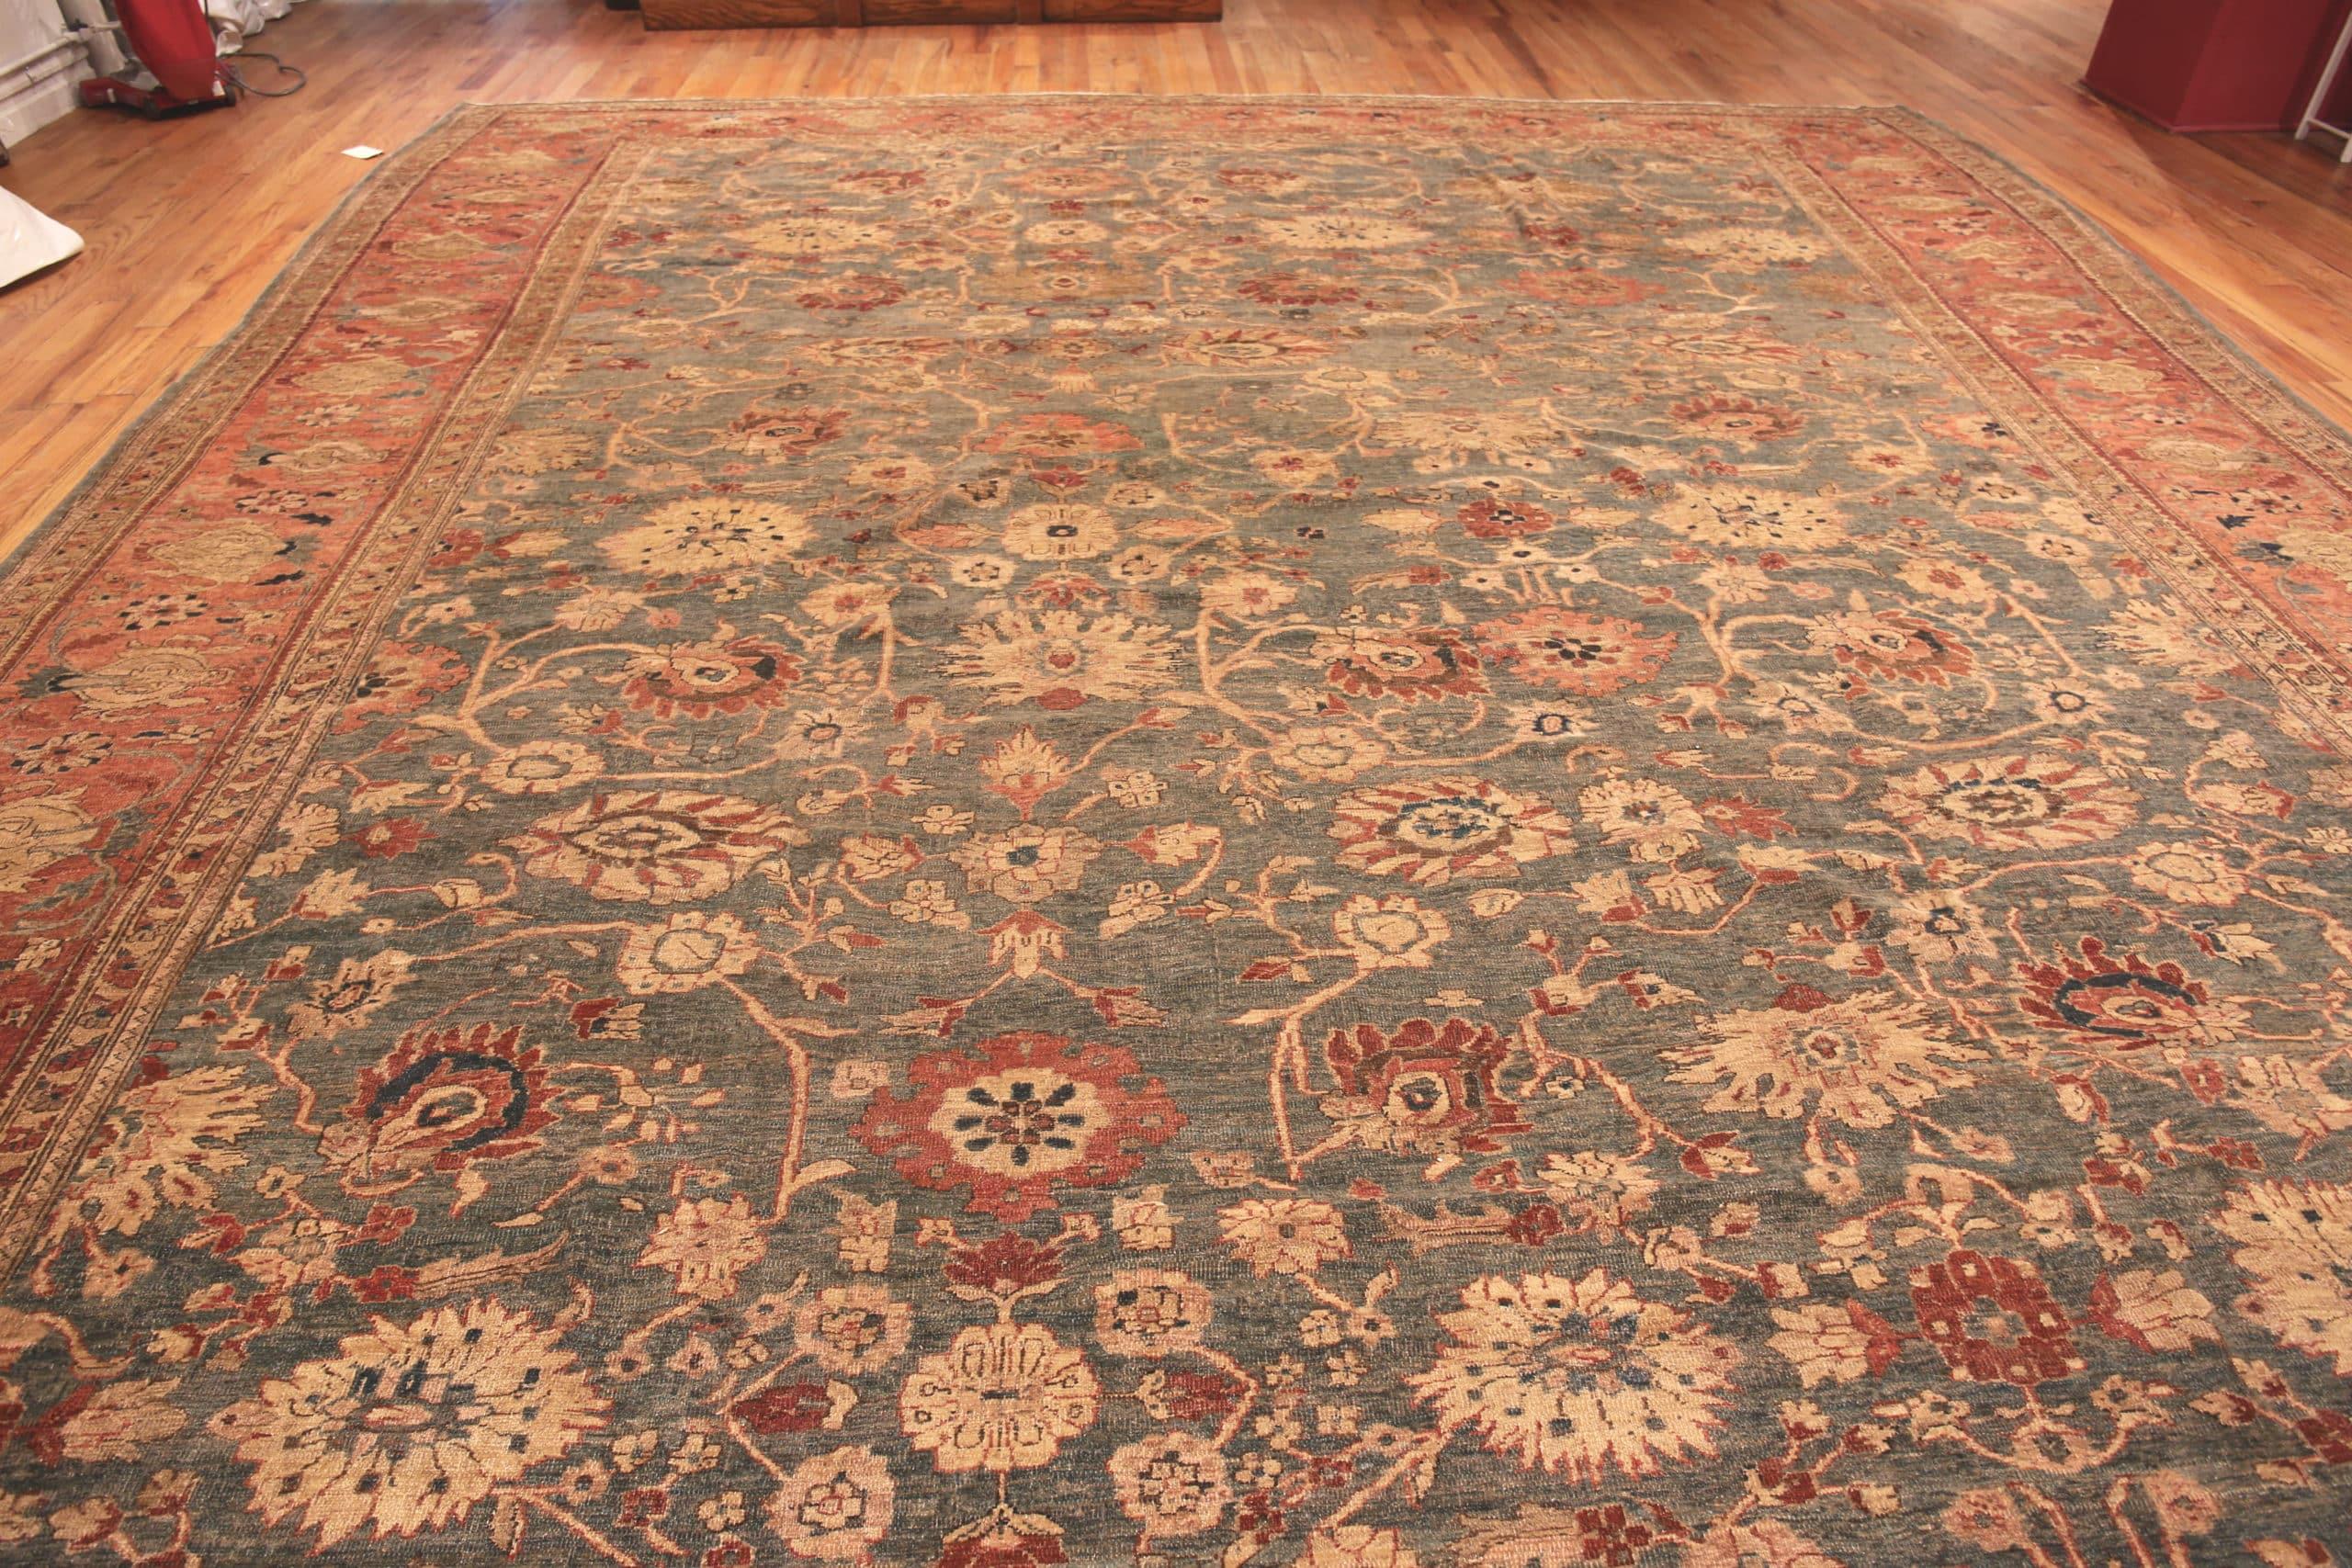 A Gorgeous Oversized Light Blue Color Antique Persian Sultanabad Rug, Country of Origin: Persia, Circa Date: Early 20th Century – Antique Persian Sultanabad rugs are treasured by interior designers and antique area rug collectors because of their